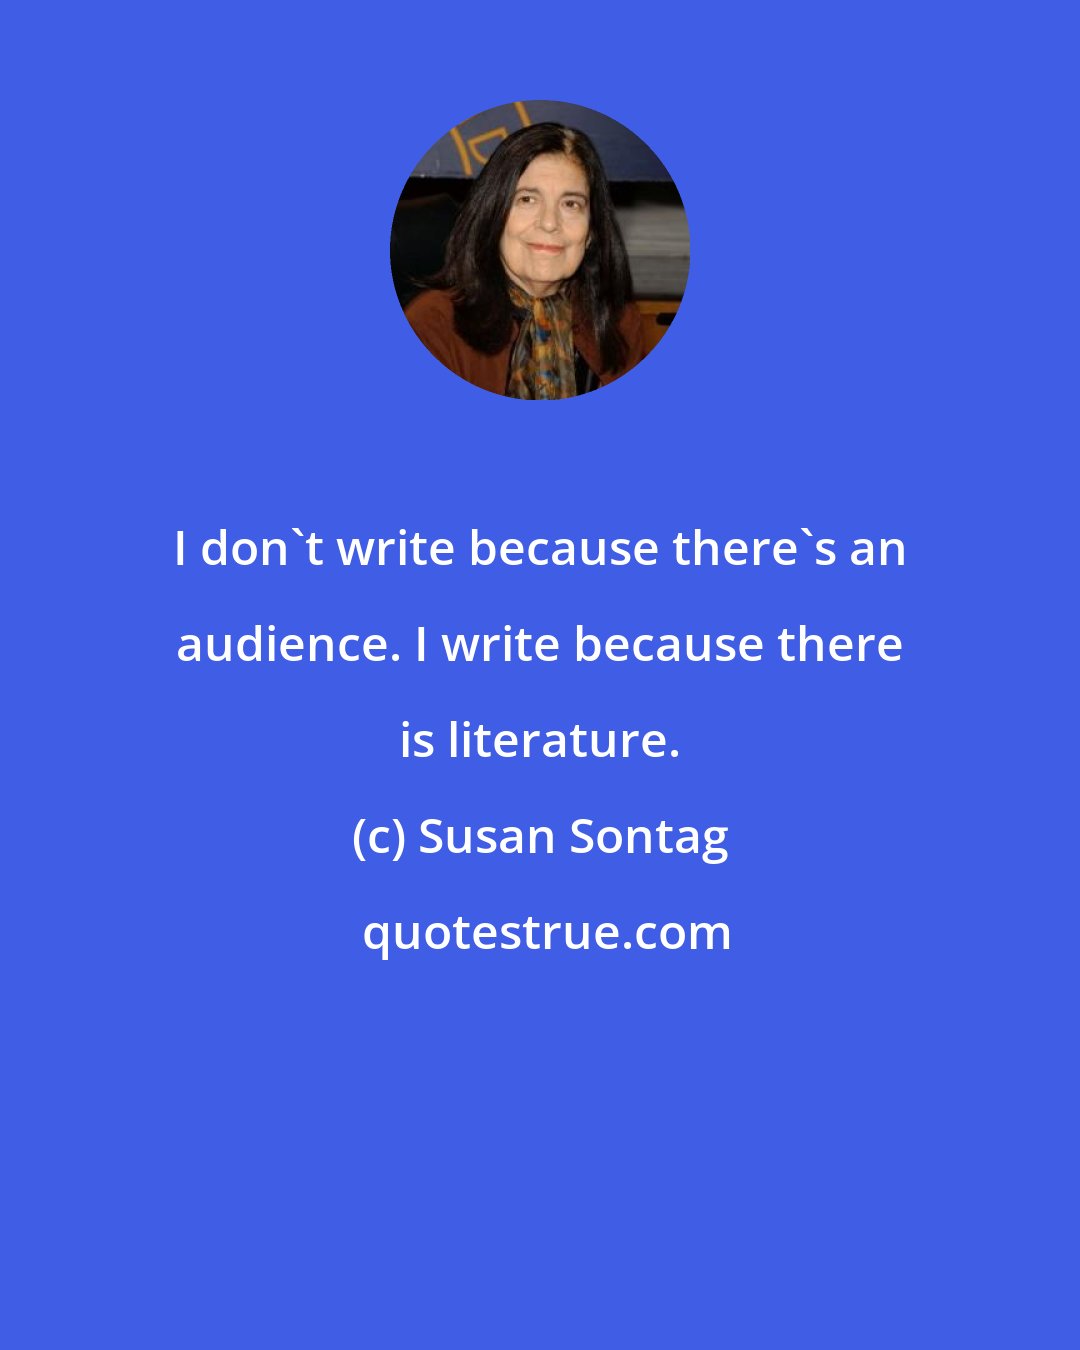 Susan Sontag: I don't write because there's an audience. I write because there is literature.